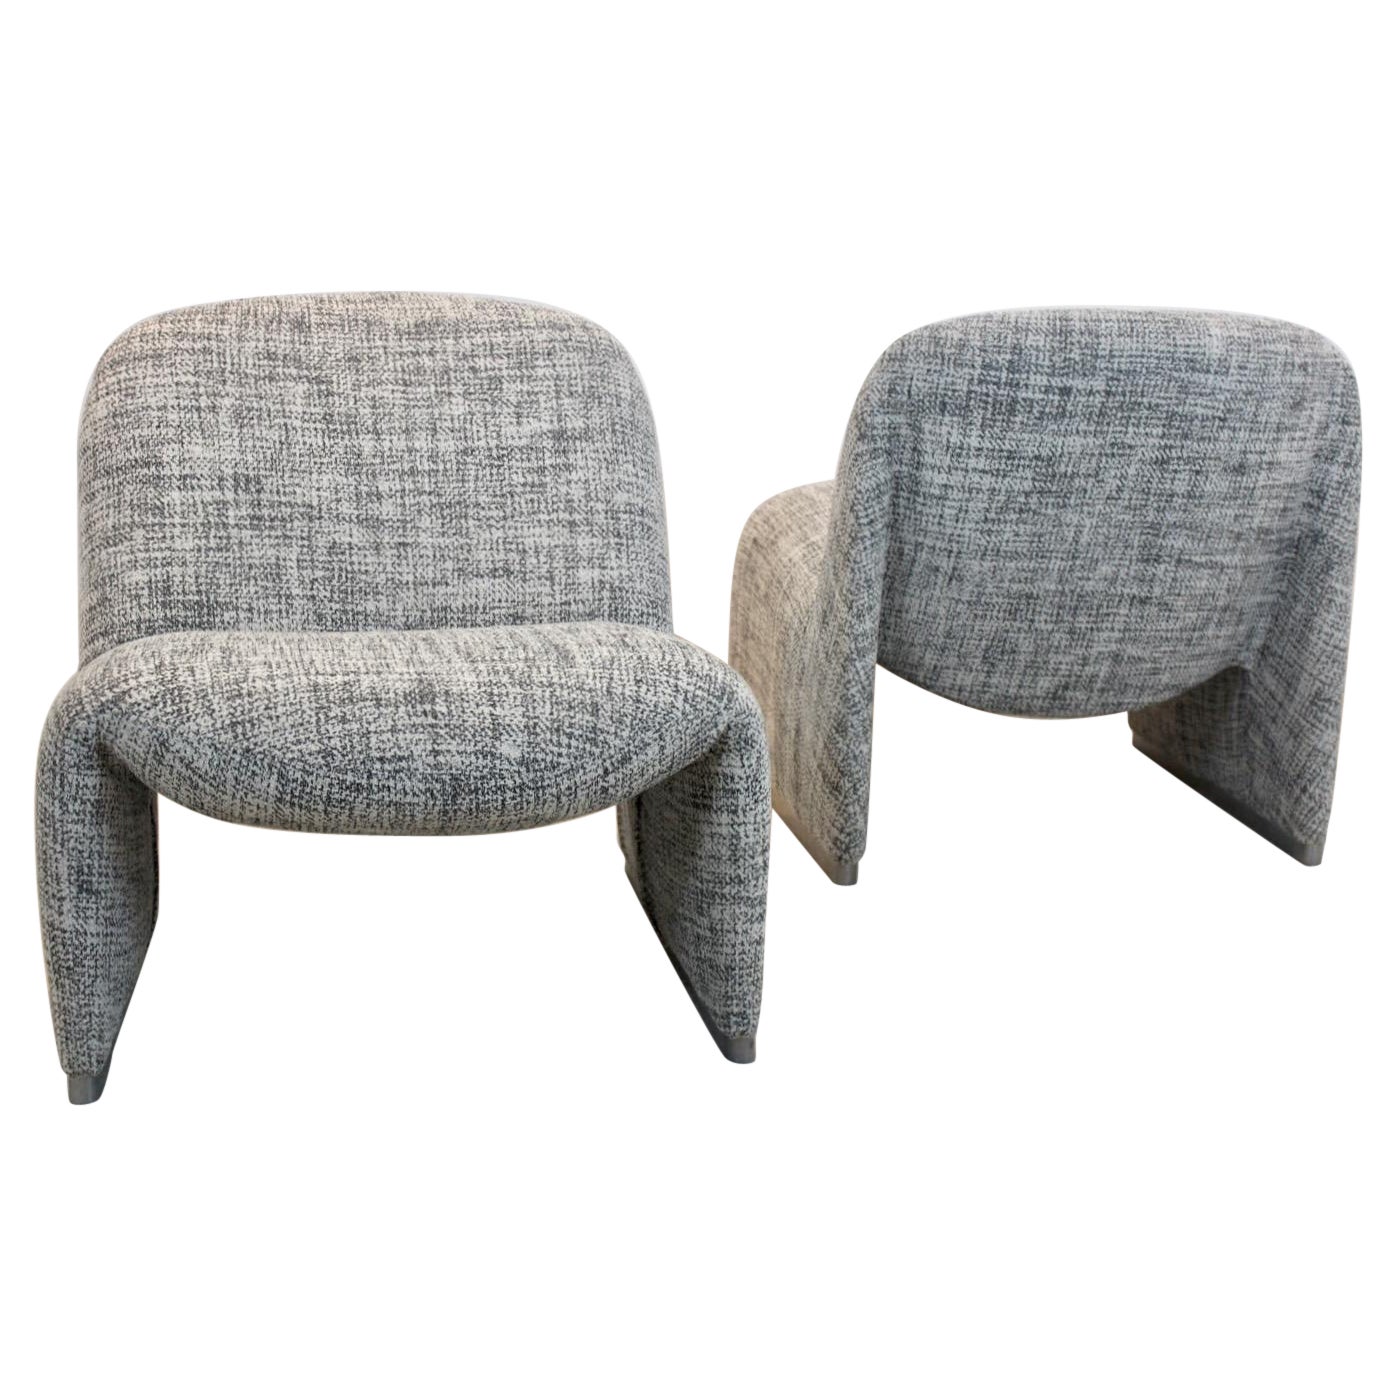 Exquisite Pair of Artifort Alky Chairs by Giancarlo Piretti